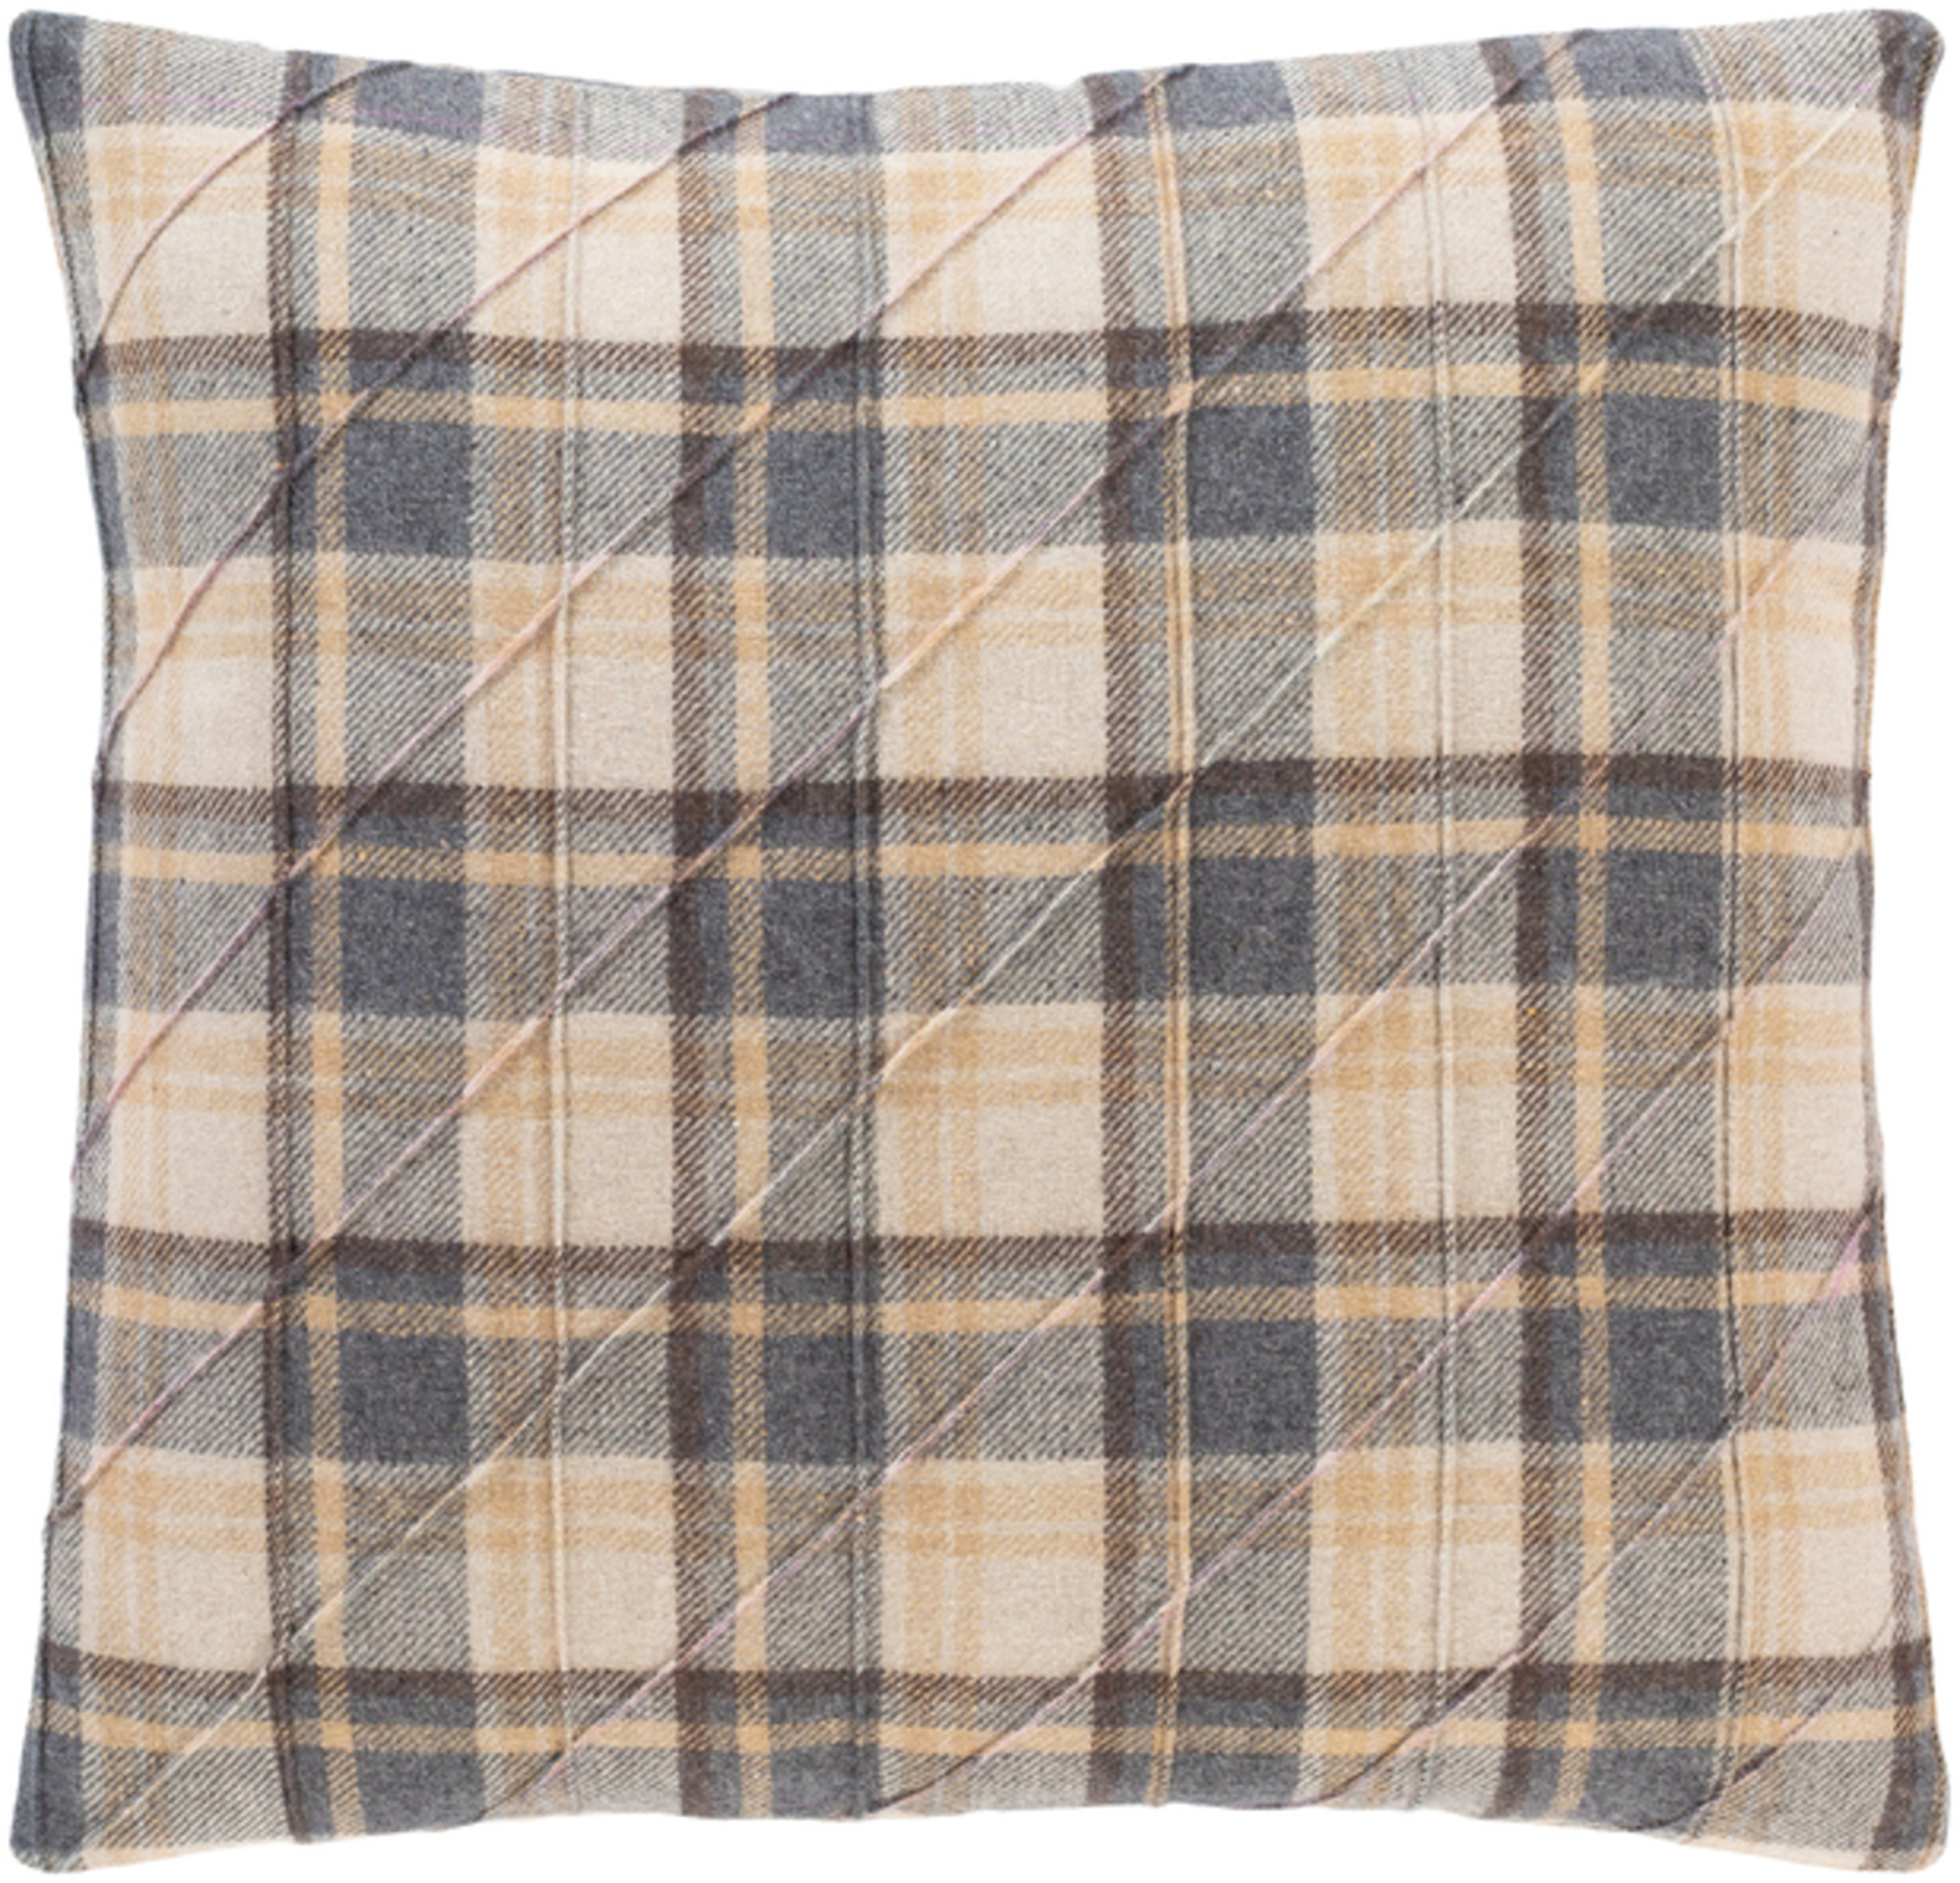 Huxley Pillow Cover, 22" x 22", Taupe - DISCONTINUED - Cove Goods